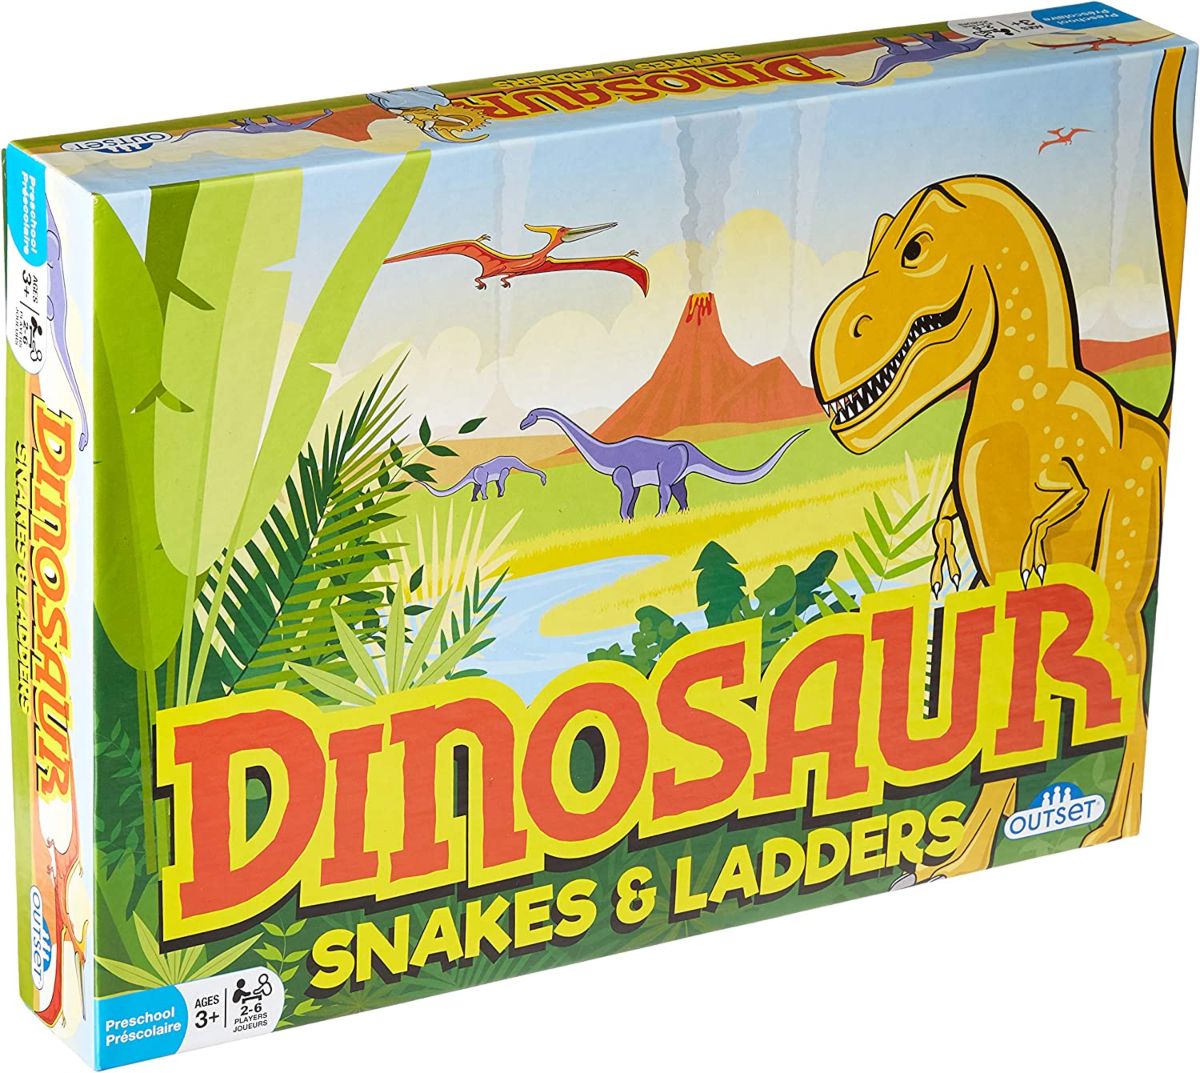 Dinosaur Snakes and Ladders